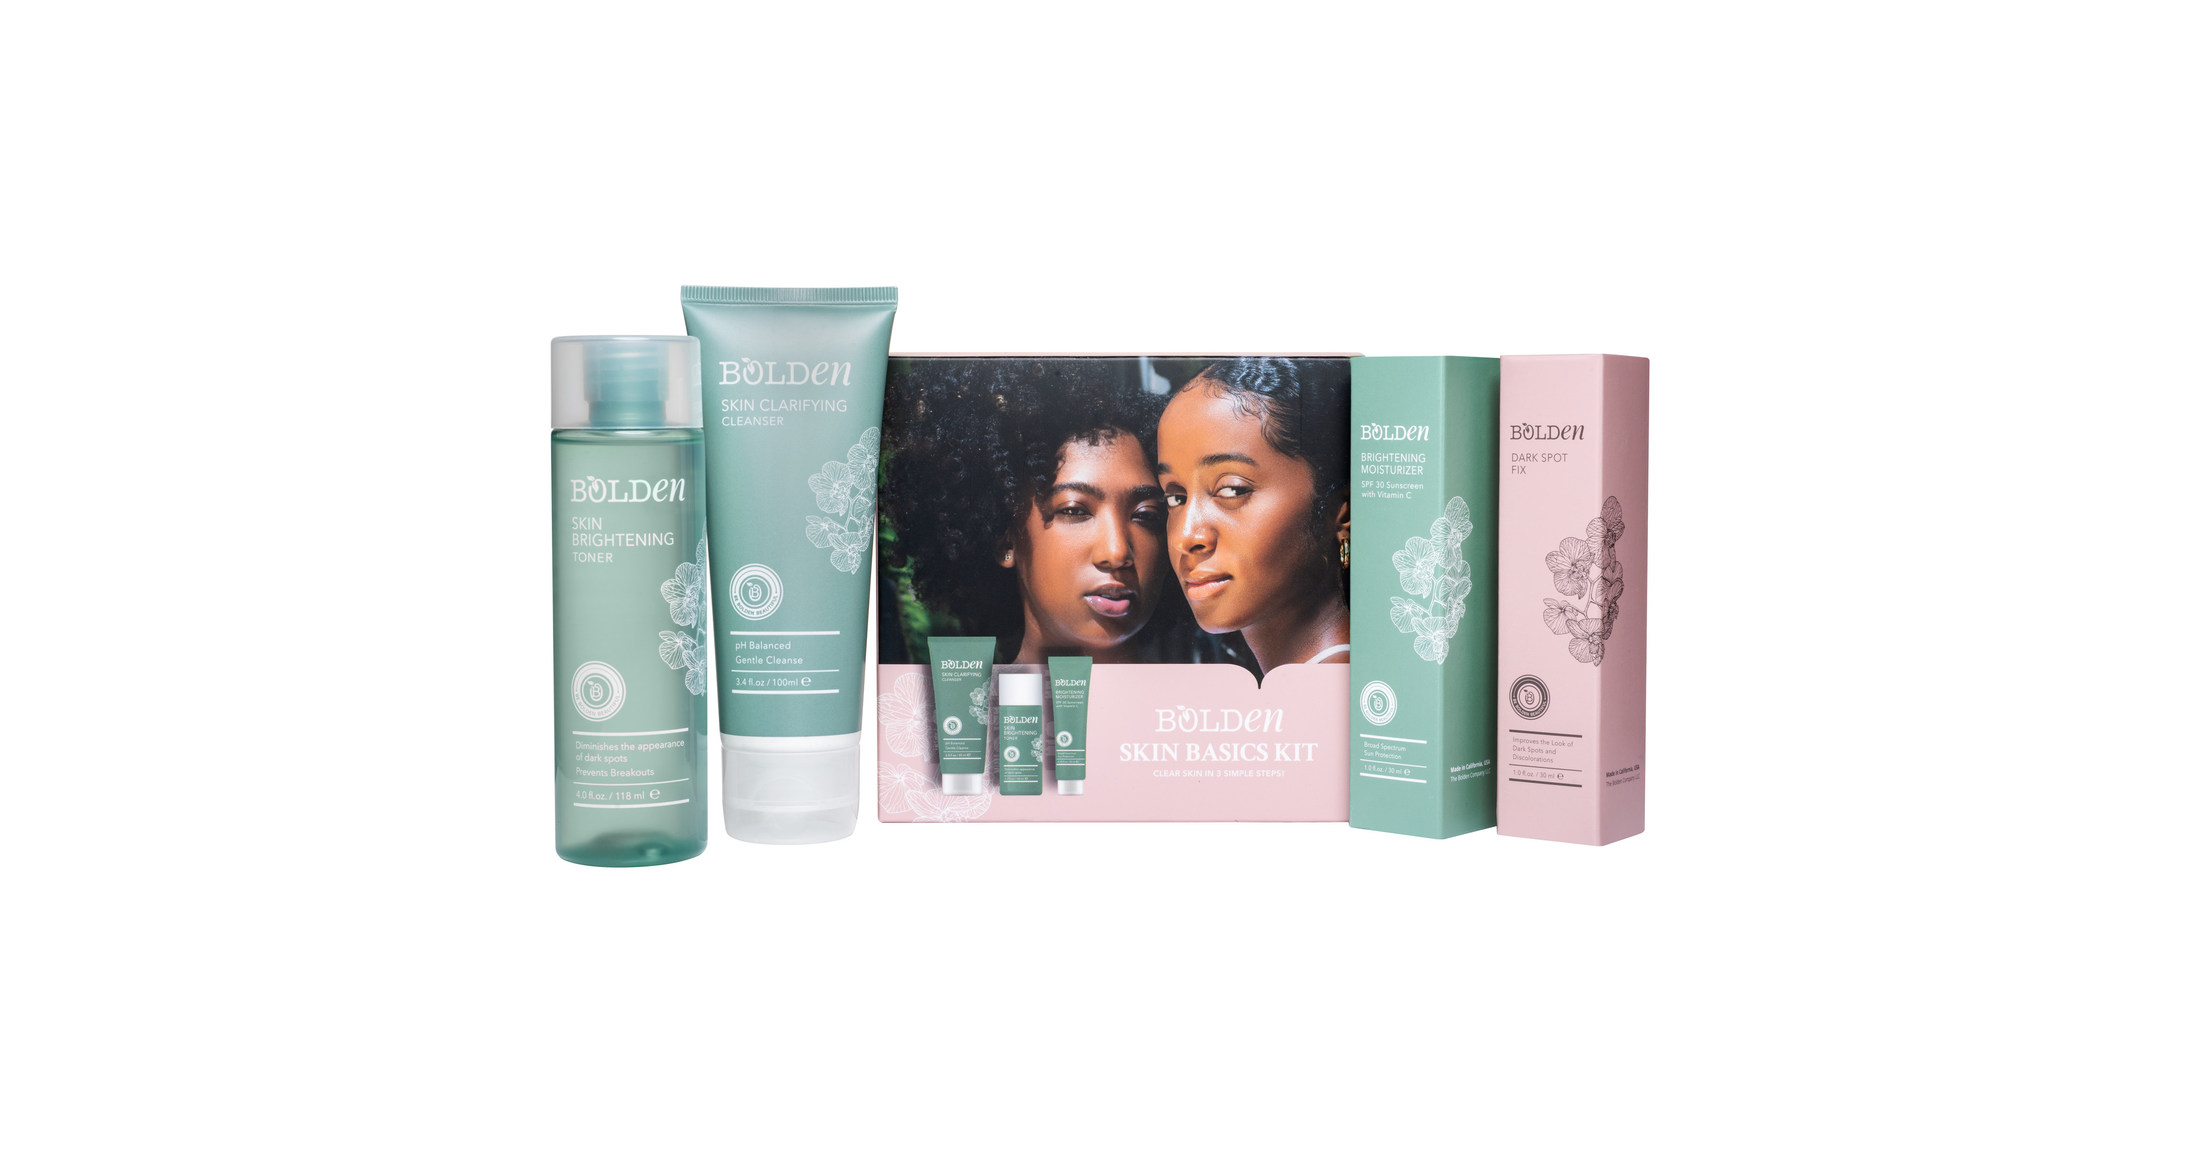 Bolden Skincare Just Launched Exclusive Products in Walmart Stores Nationwide